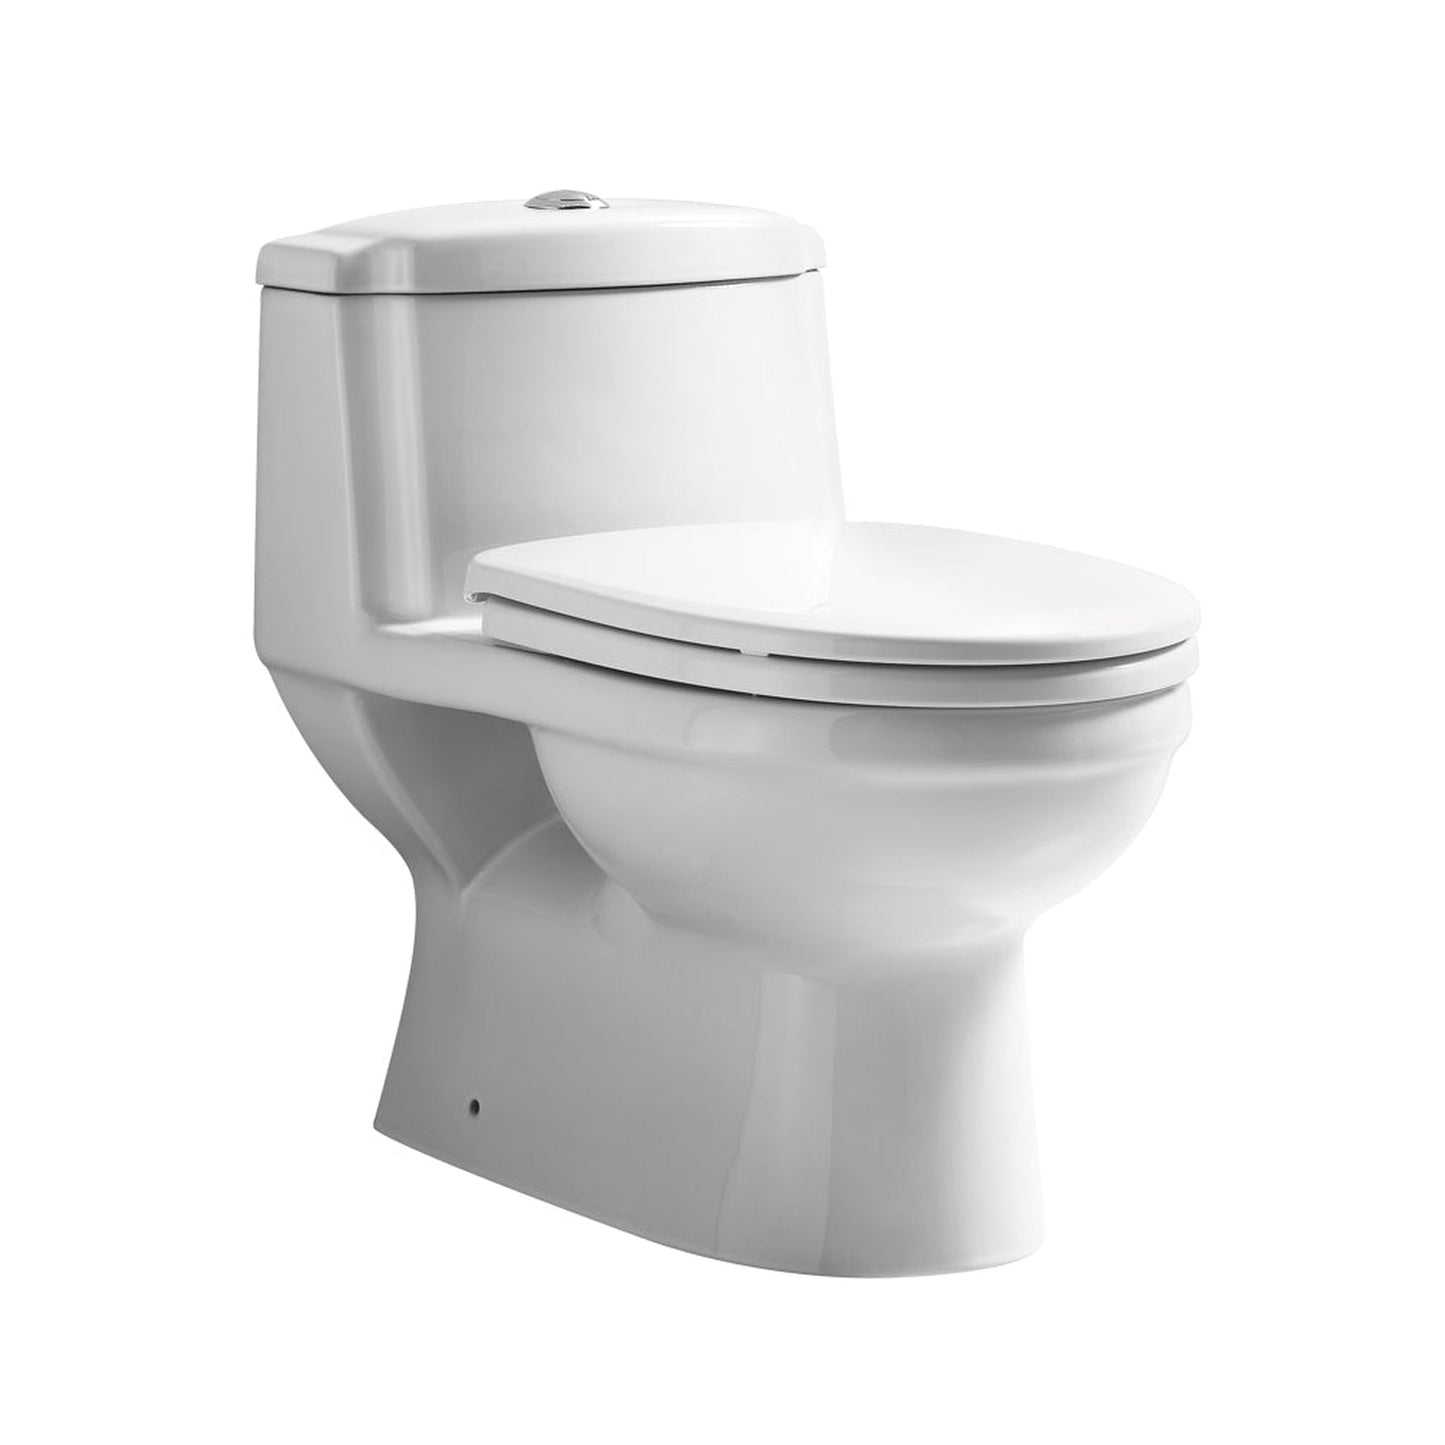 Whitehaus Magic Flush WHMFL3222-EB Eco-Friendly One Piece Toilet With a Siphonic Action Dual Flush System